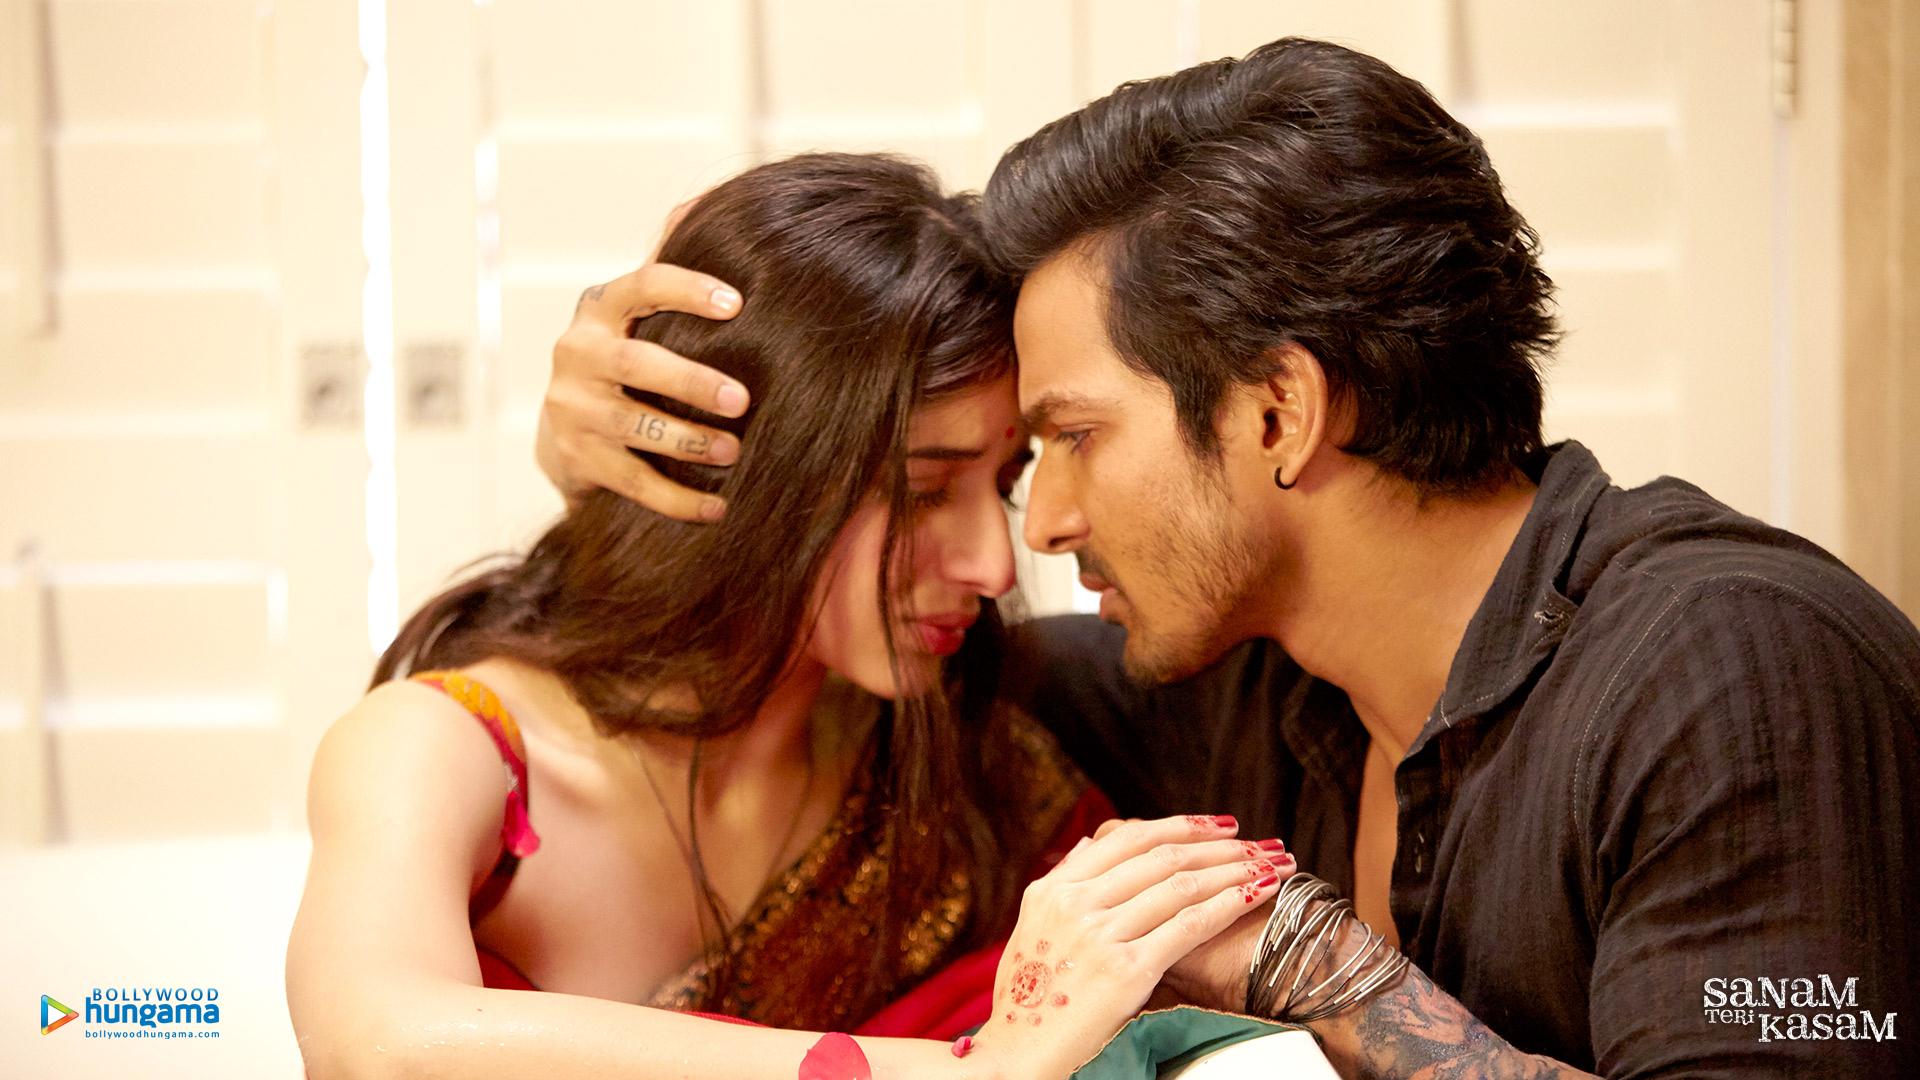 Get Turned On with Sanam Teri Kasam Wiki's Sensual Gallery